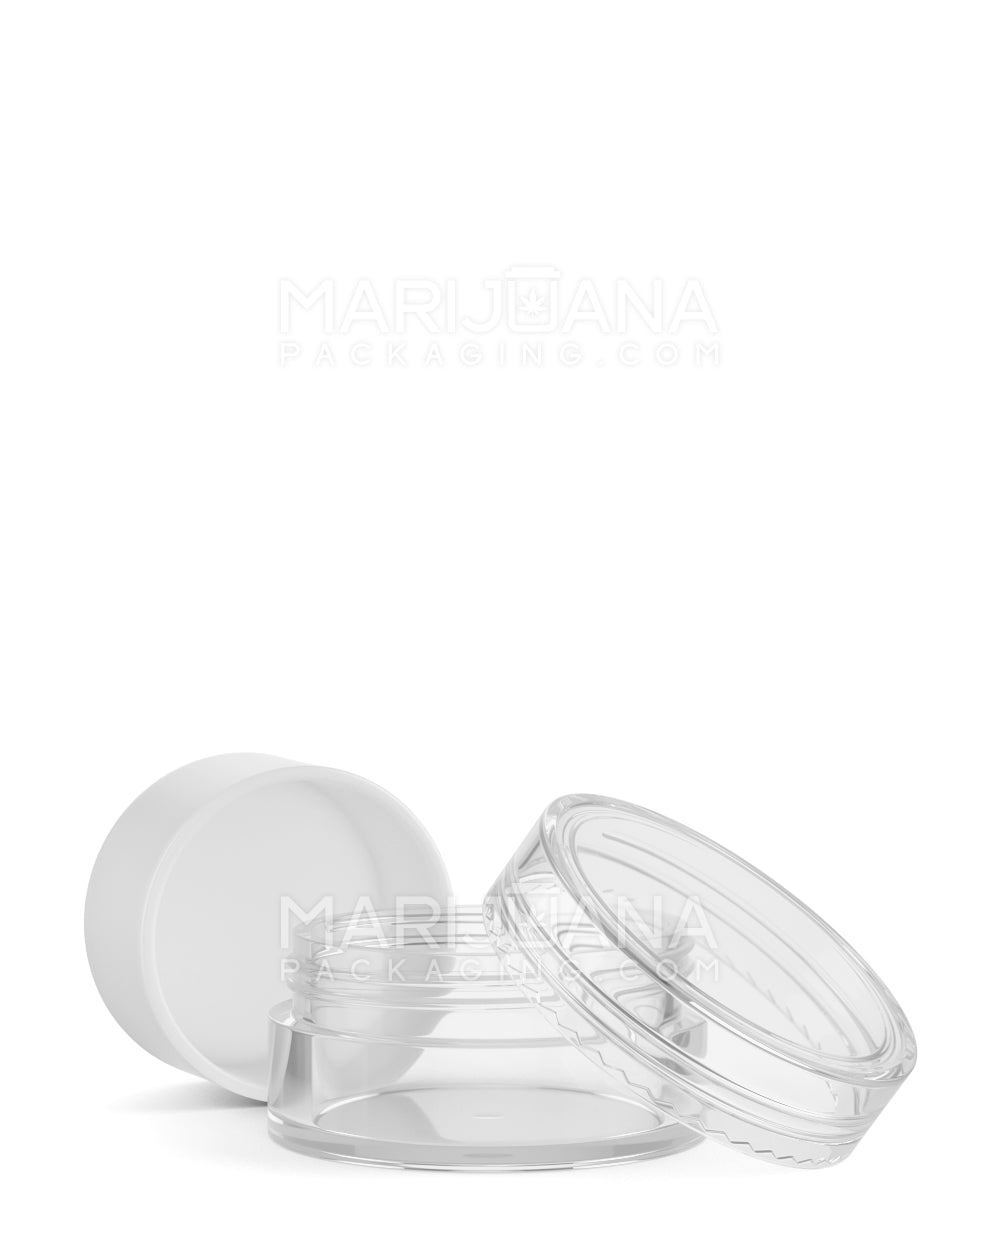 Clear Concentrate Containers w/ Screw Top Cap & White Silicone Insert | 10mL - Plastic - 100 Count - 4